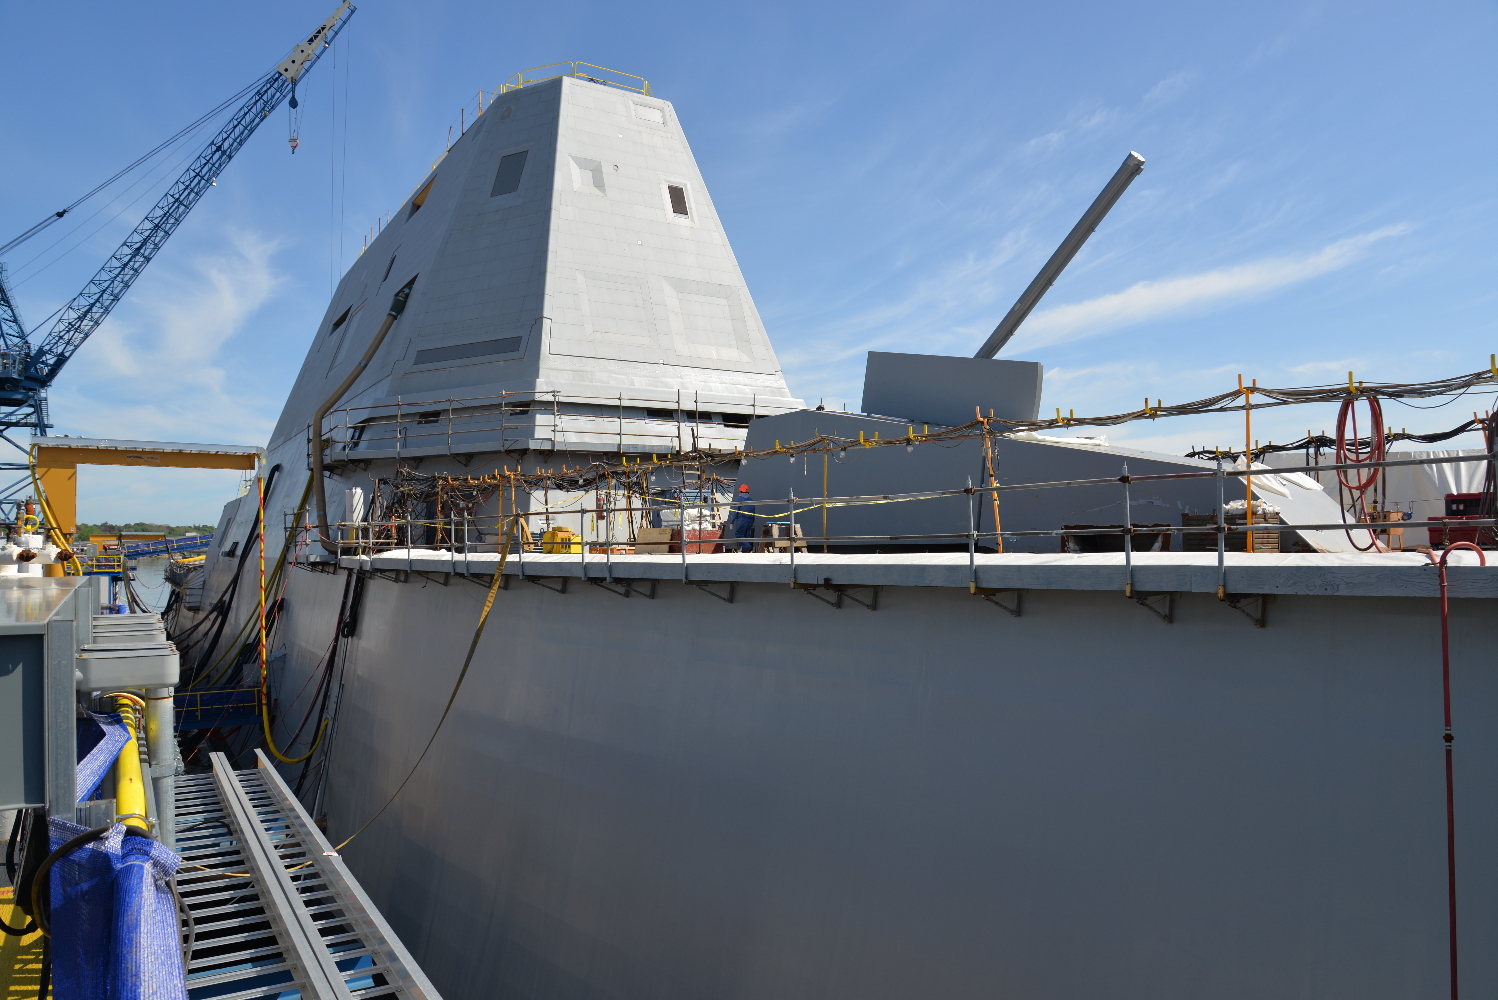 The forward and after decks are lined with vertical launchers able to handle a variety of missiles. The deck-edge scaffolding here is just outside the launchers, which are embedded in the side of the ship.